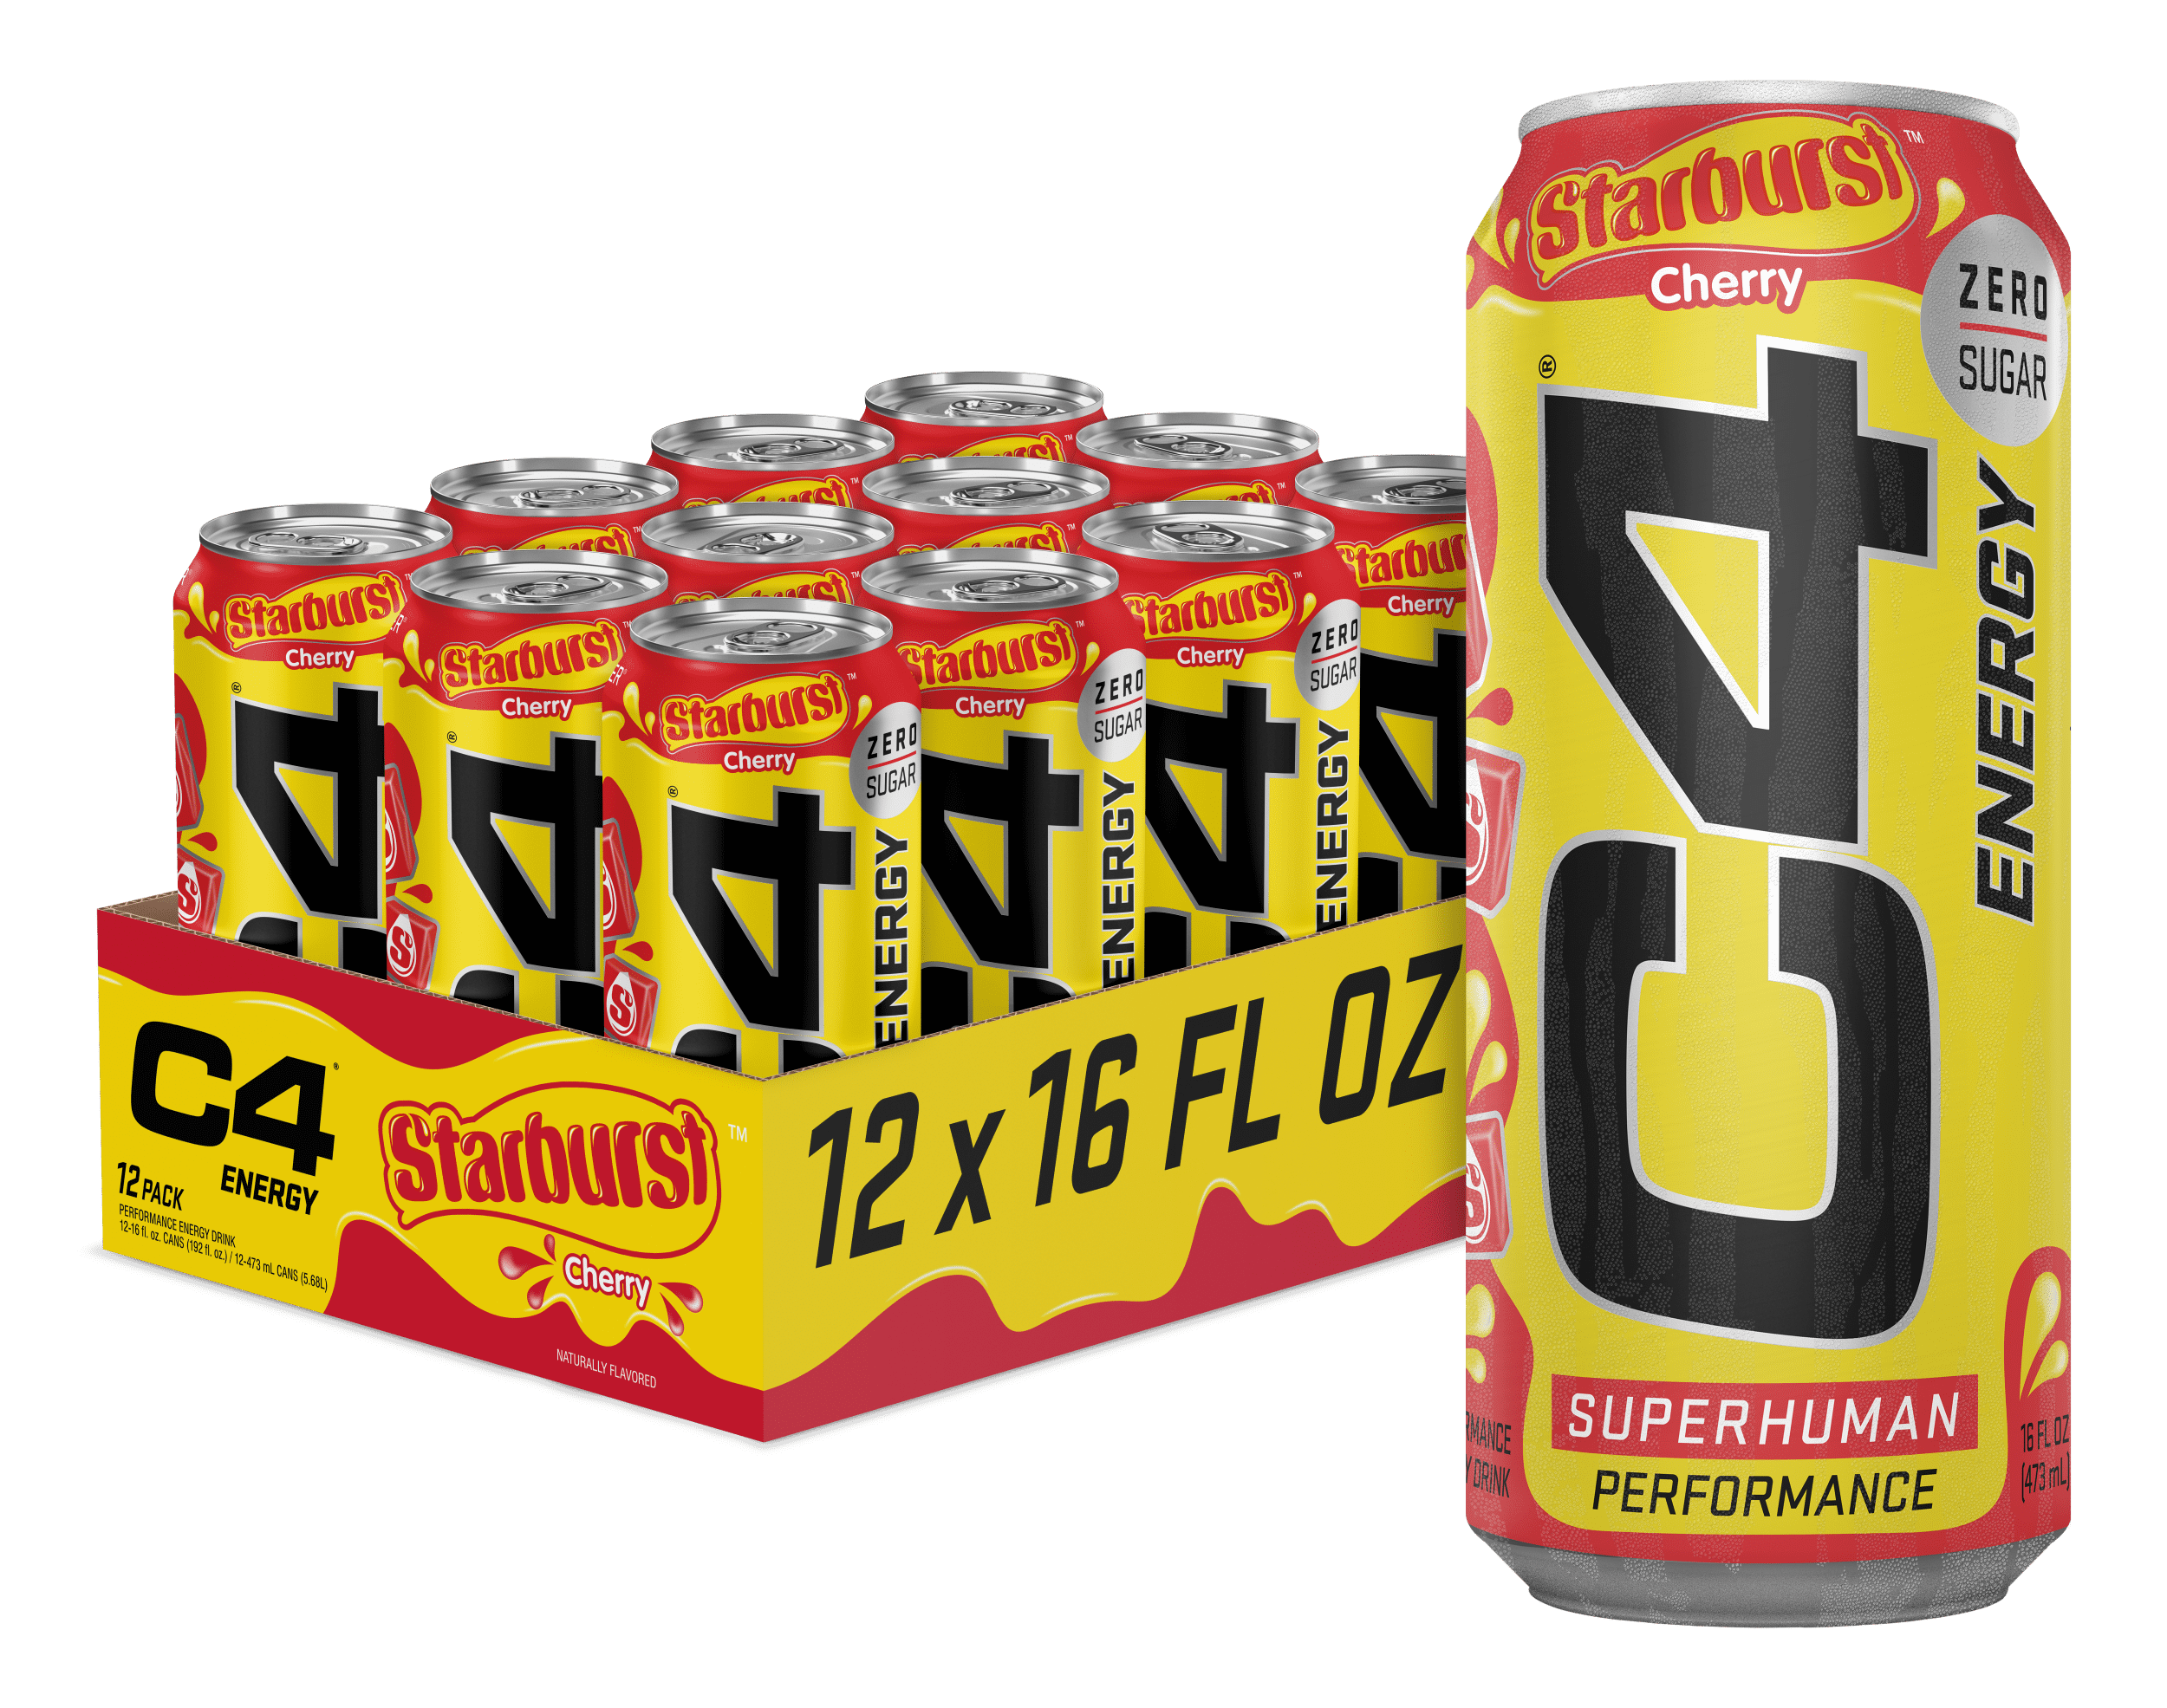 C4 Energy Drink, Starburst Cherry, Sugar Free, Carbonated Pre Workout  Drink, 16 oz, 12 pack 